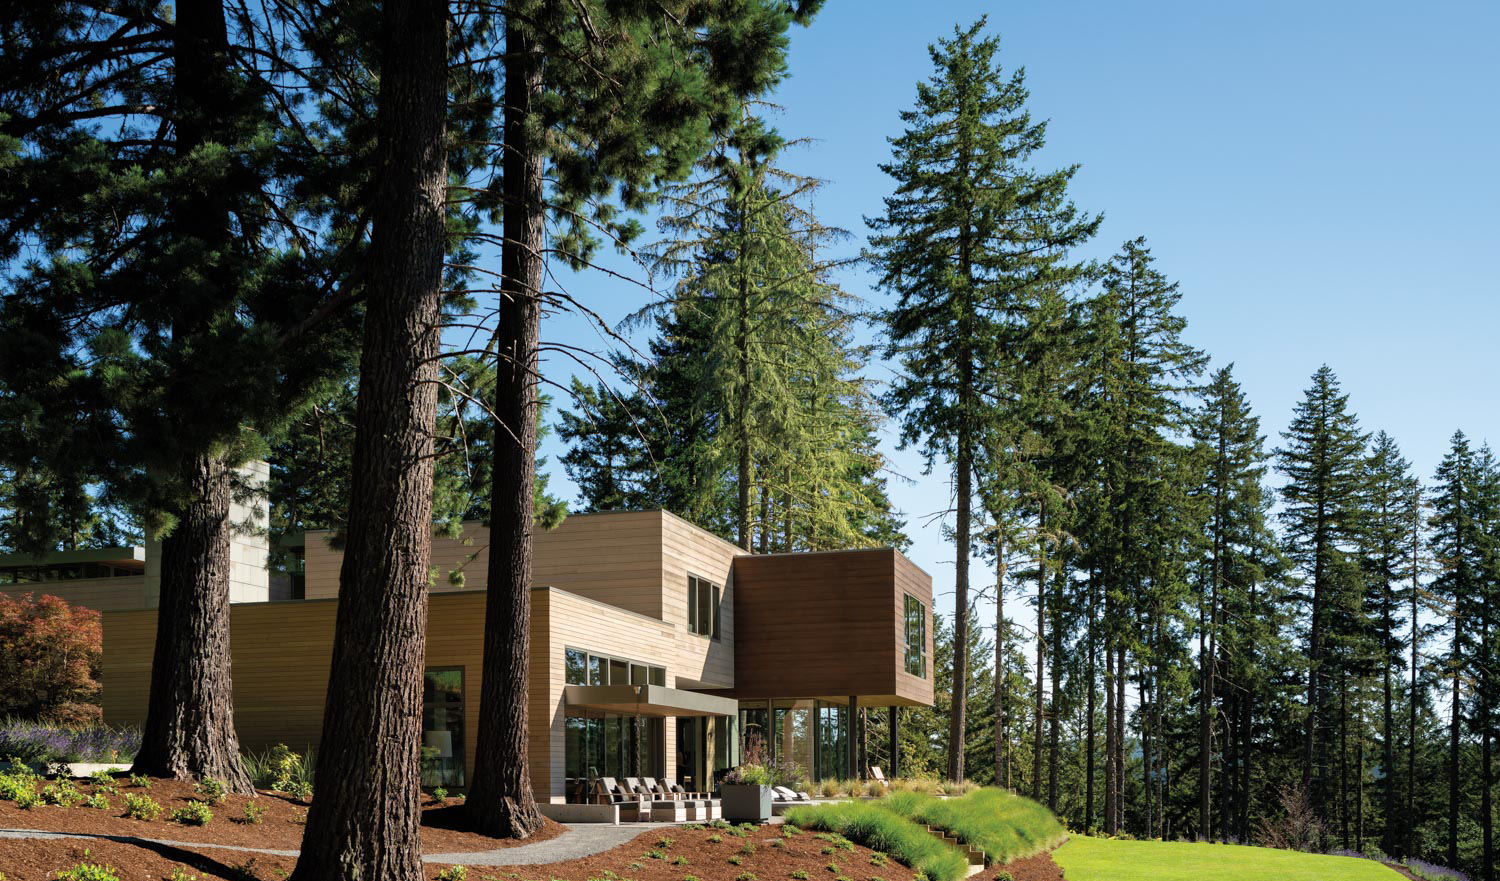 Cozy Up In This Northwest Home With Cinematic Views Of The Landscape